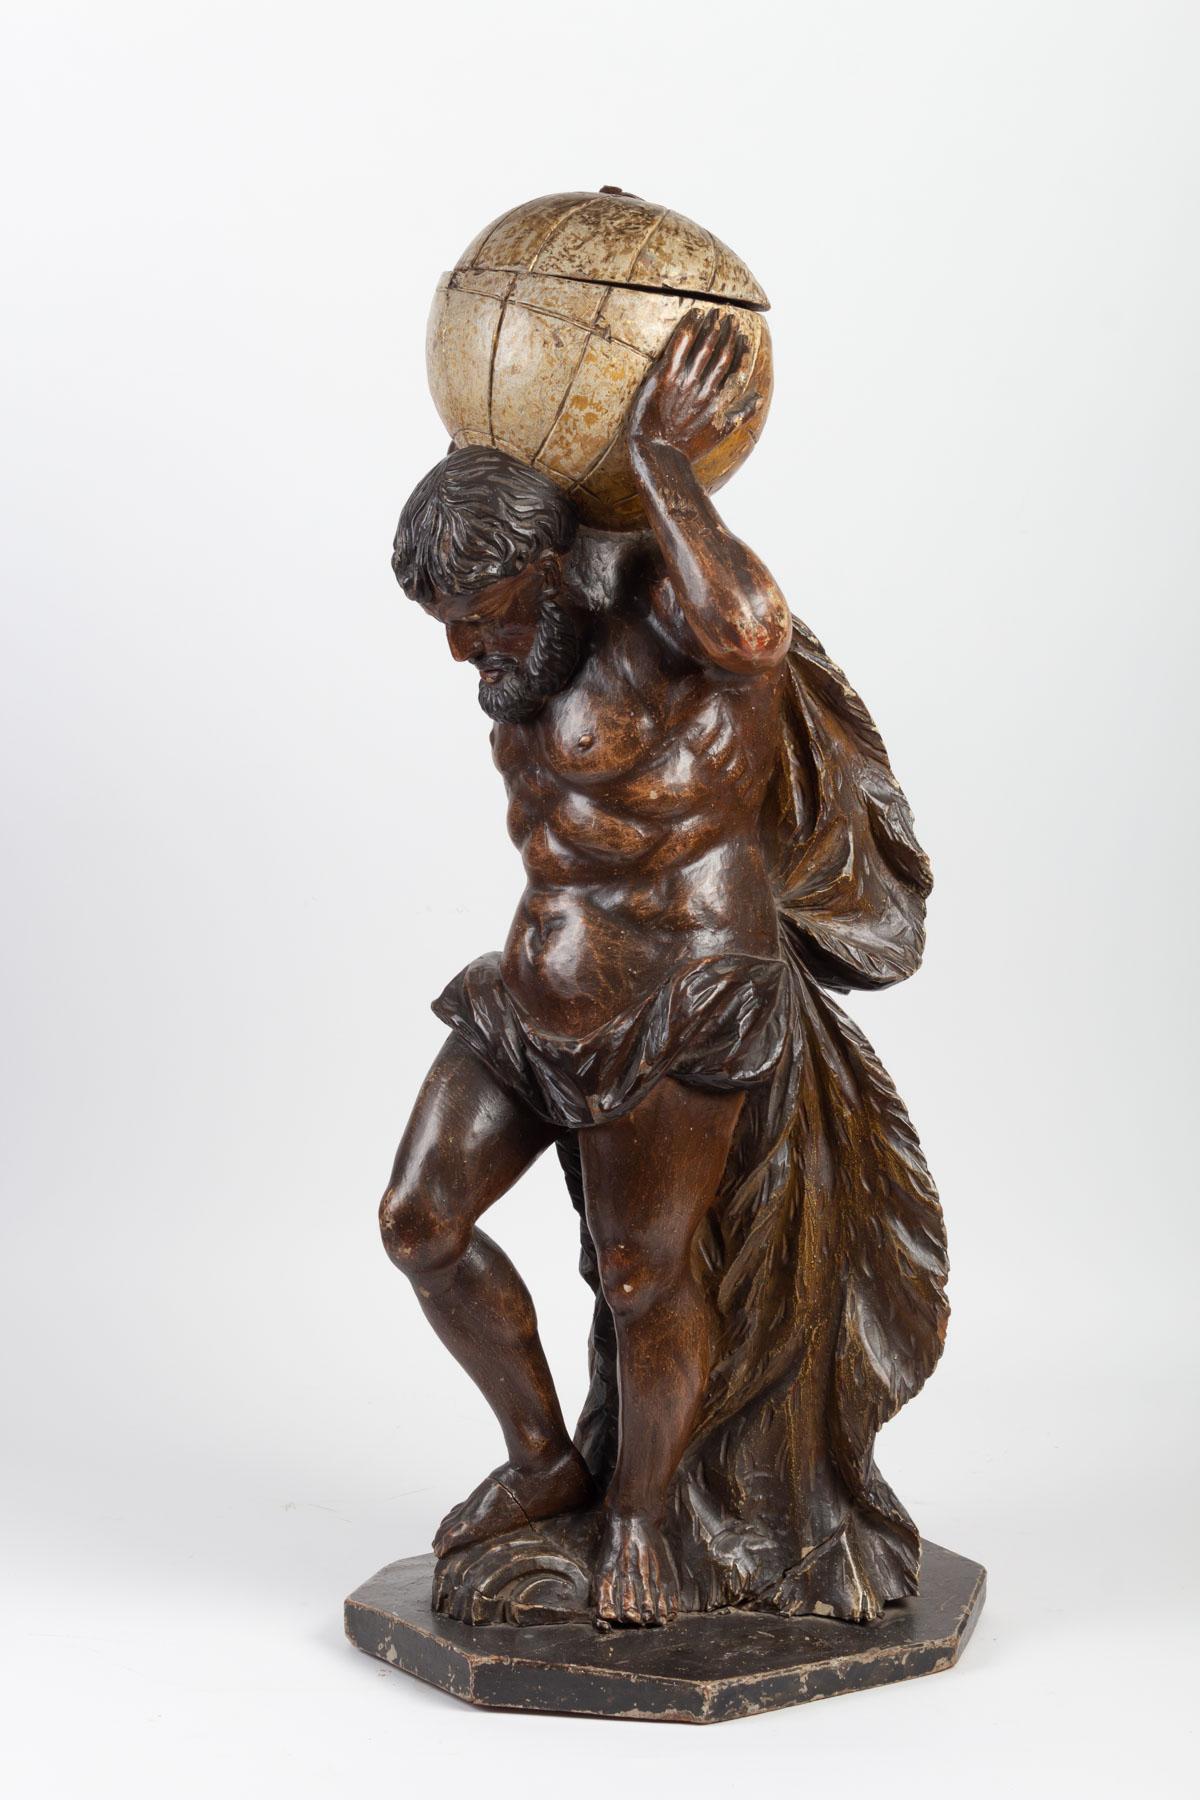 Wood sculpture carved and Polychromy, representing Atlas, 18th century
Measures: H 82 cm, W 32 cm, D 32 cm.